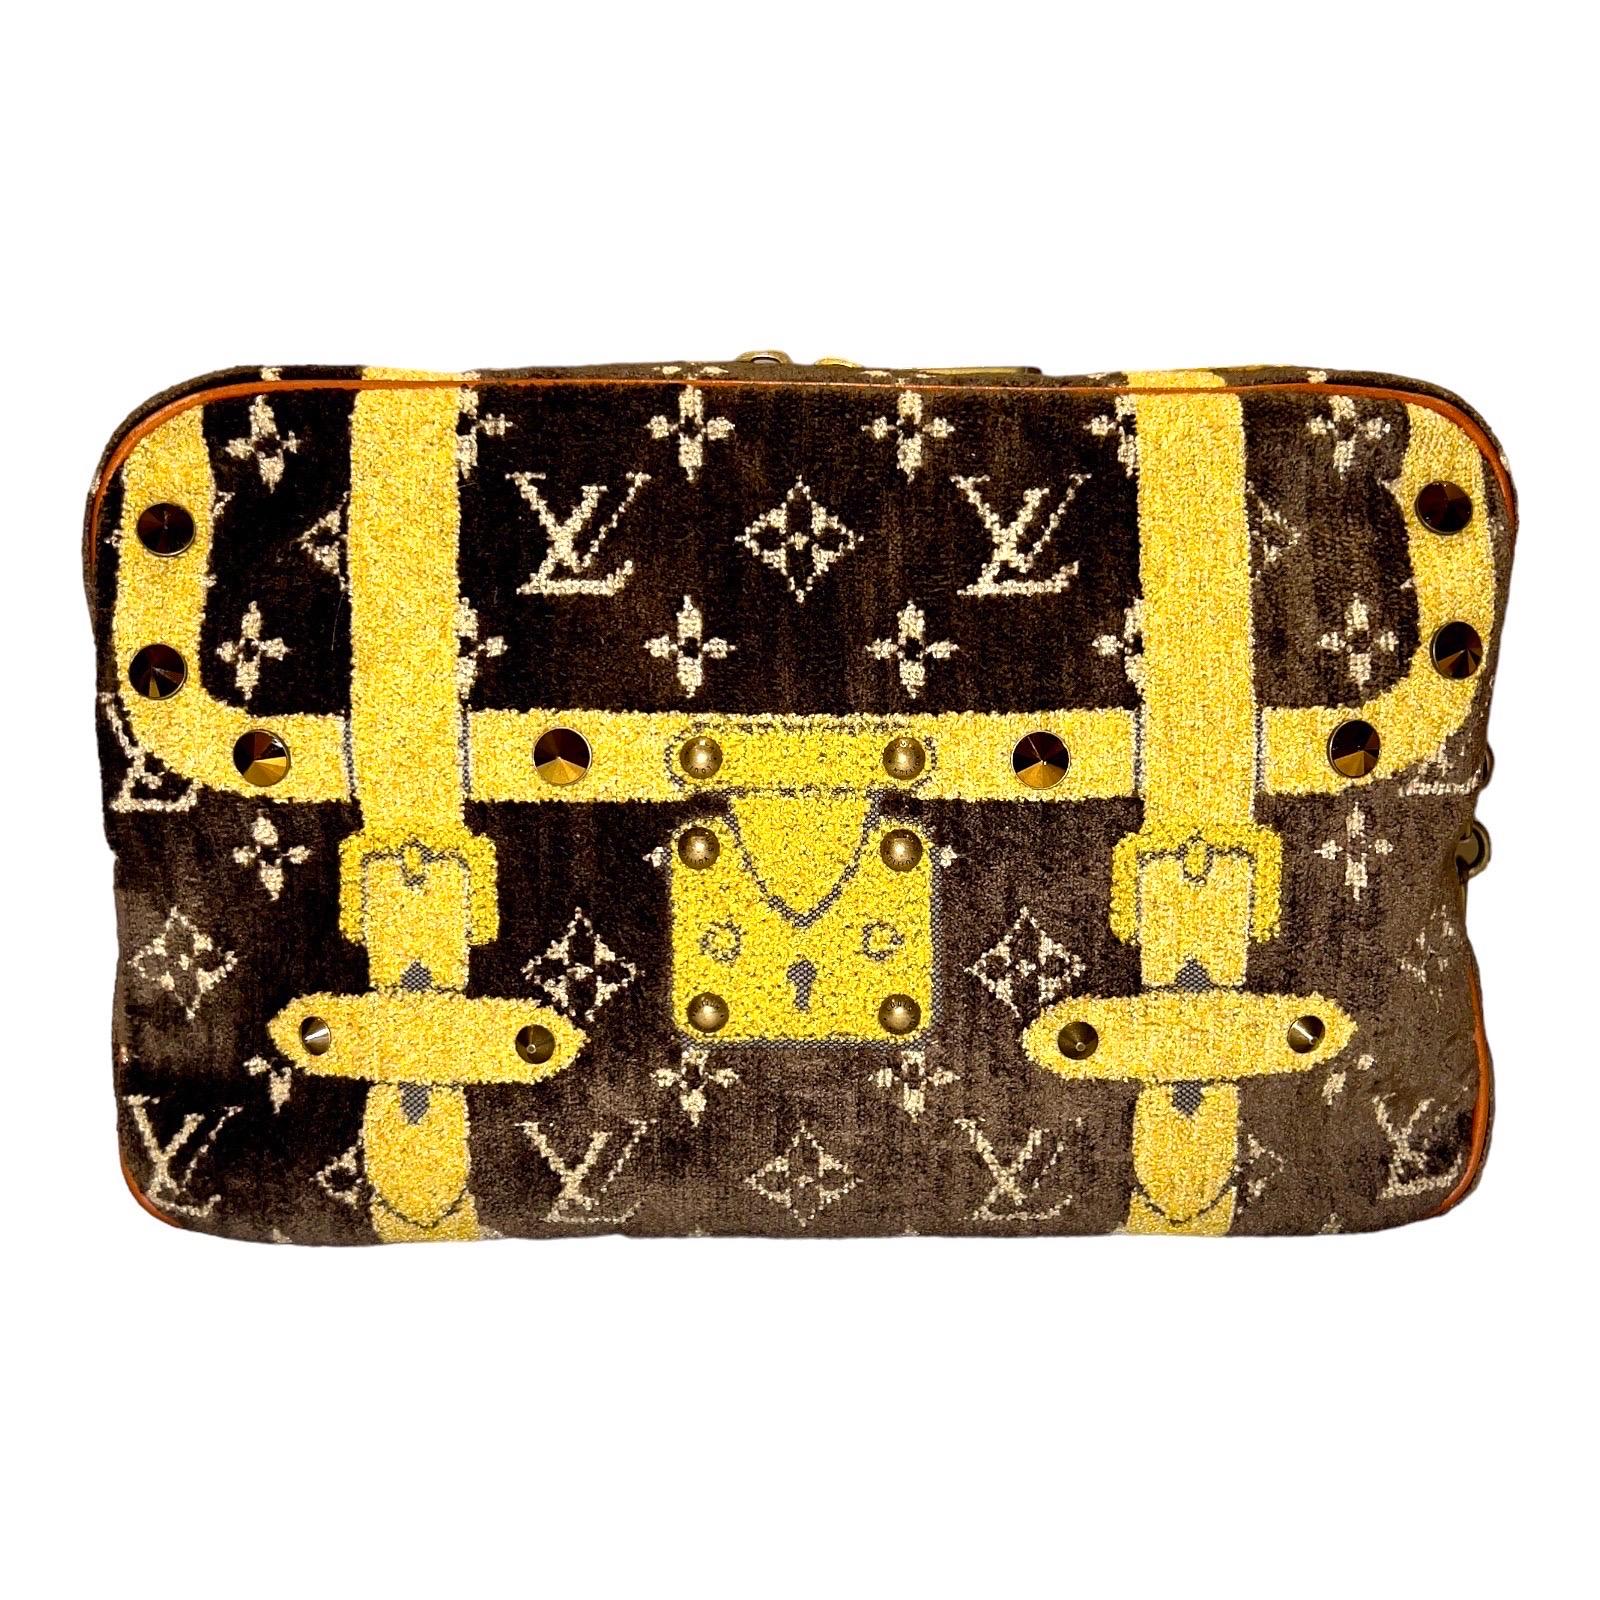 A Louis Vuitton signature piece that will last you for many years, from one of Vuitton's most stunning collections designed by Marc Jacobs.

Crafted from brown monogram velvet, this fabulous bag features shoulder chains with crocodile shoulder pads